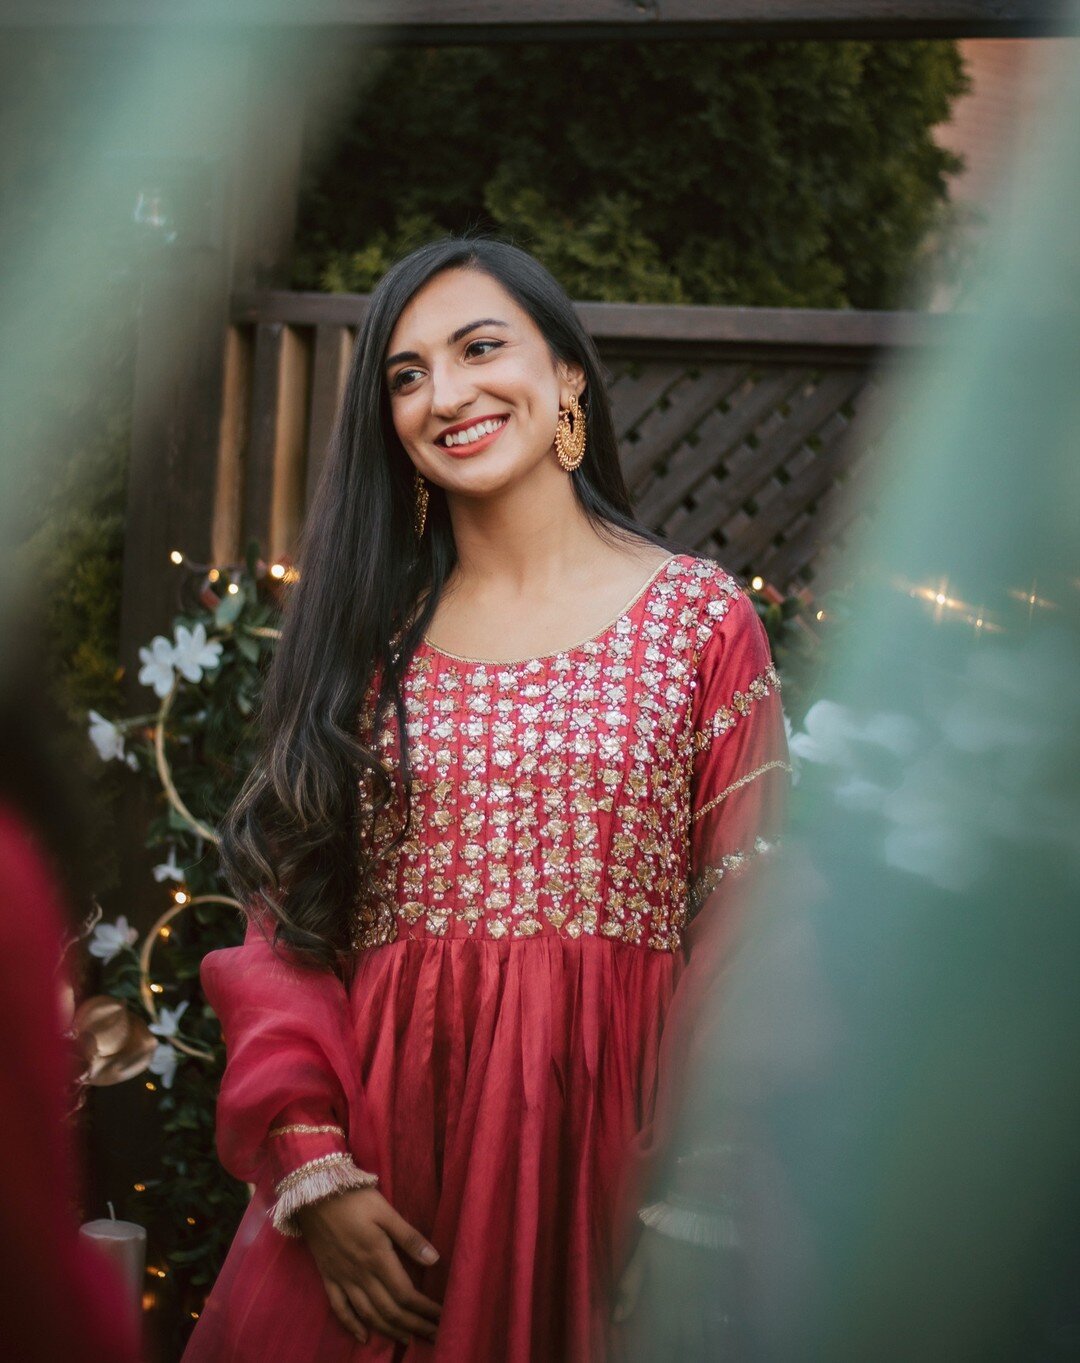 love to see a smiling bride to be! 🥰 
.
.
.
.

#torontowedding #torontoweddingphotographer #pakistaniweddingphotographer #weddingblog #weddinginspiration #weddinginspo #flutterphotography #torontophotographer #bokeh #dholki #documentaryweddingphotog